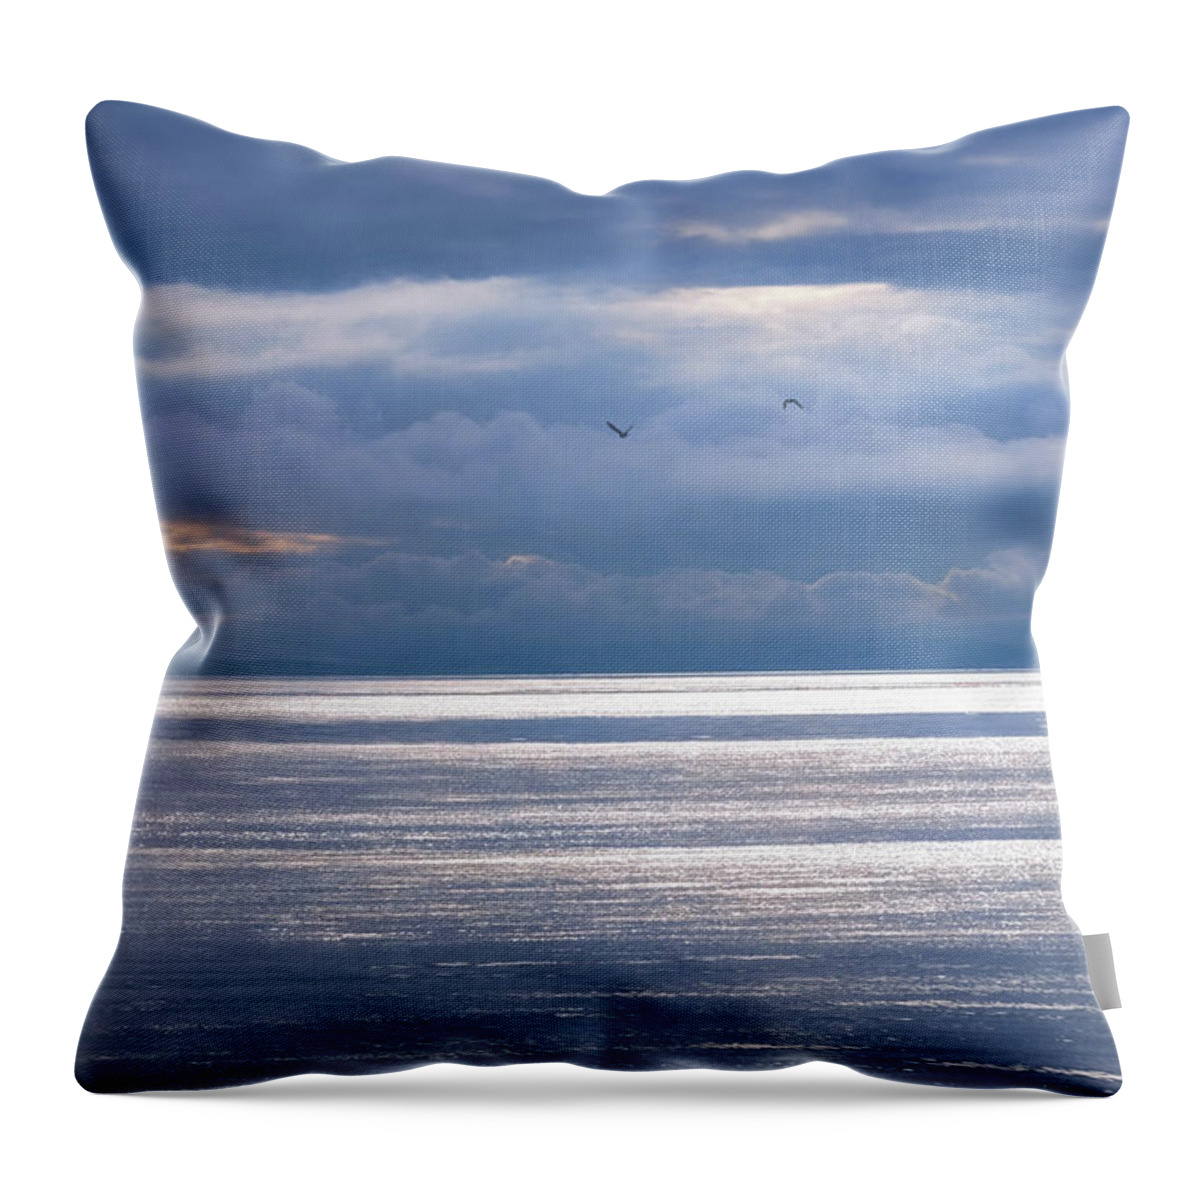 Storm Supremacy Throw Pillow featuring the photograph Storm Supremacy by Jordan Blackstone